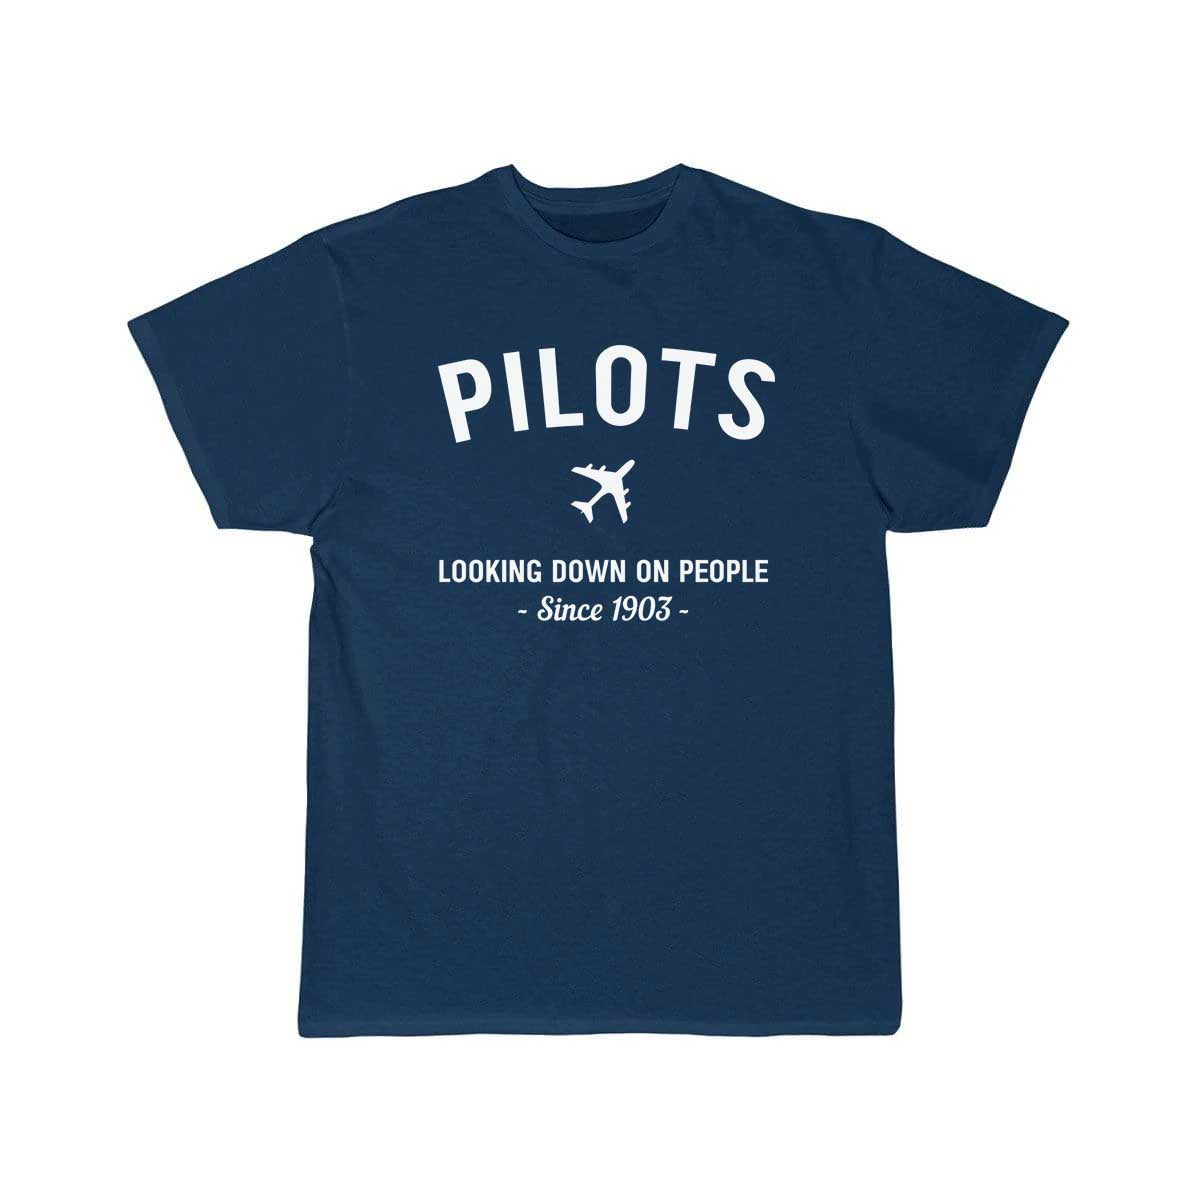 Pilots. Looking down on people since 1903 T-SHIRT THE AV8R